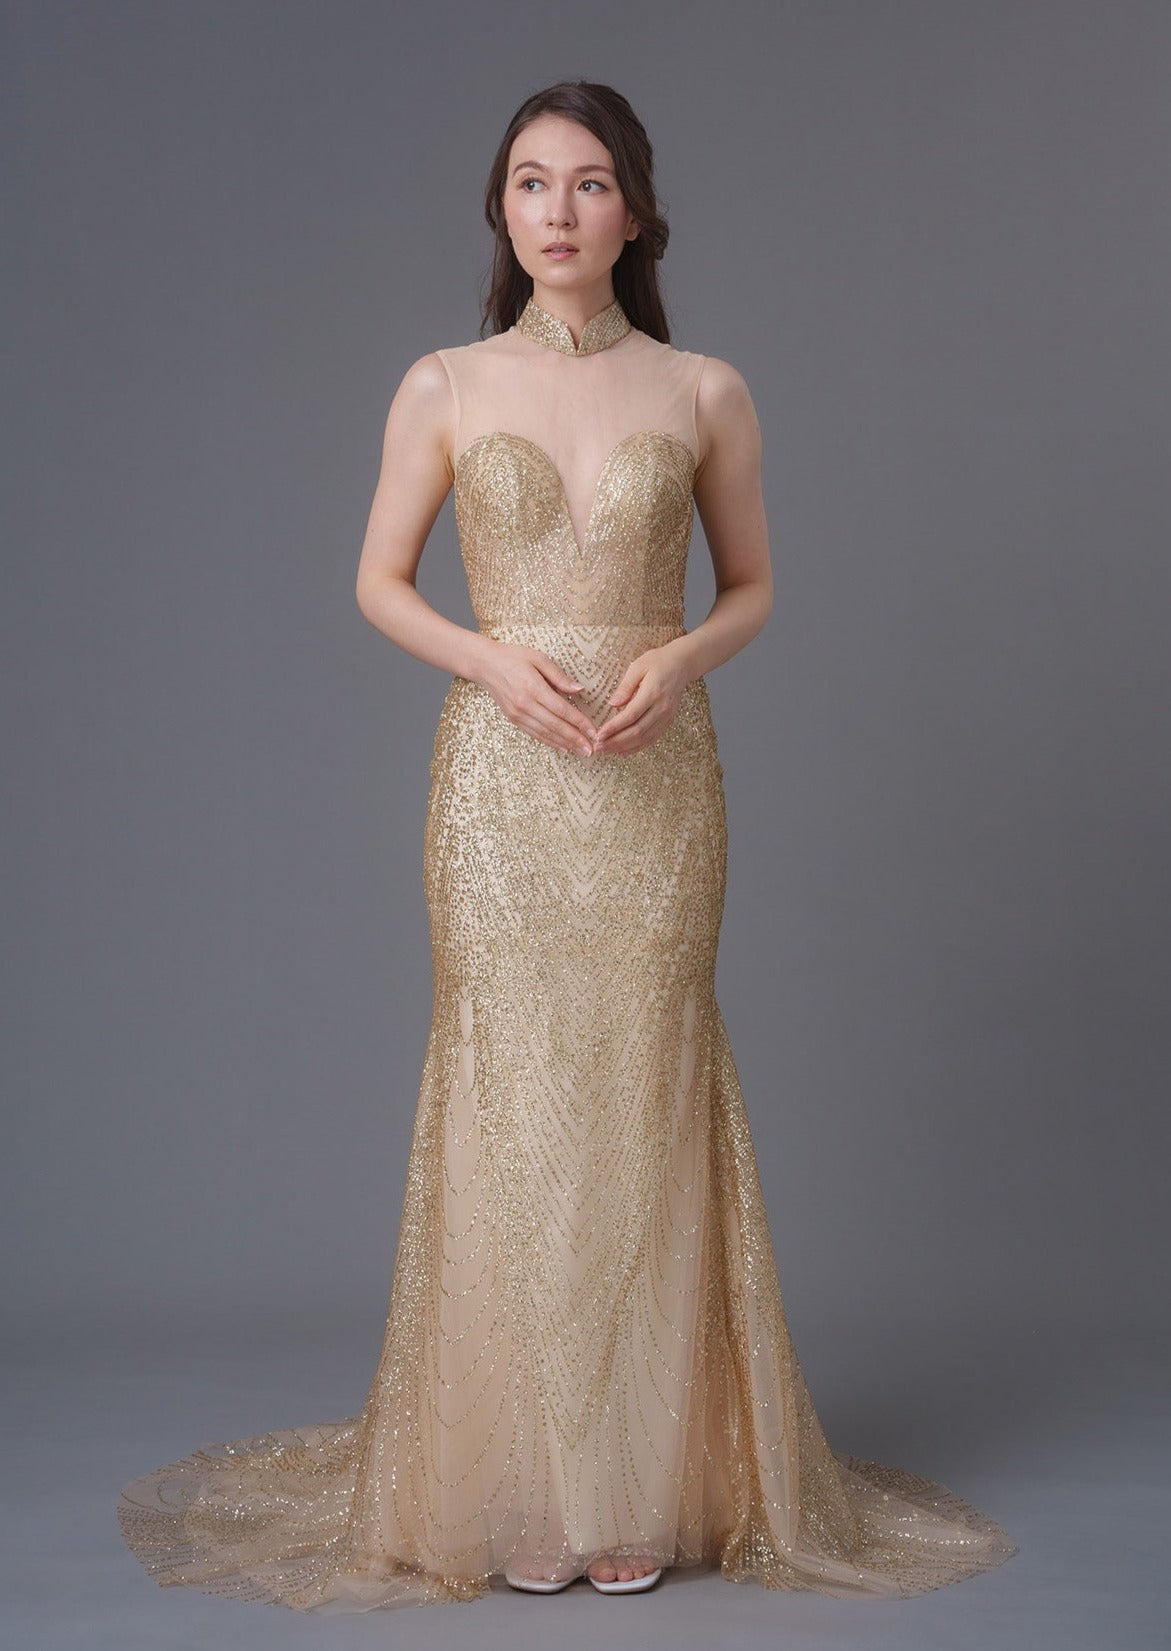 An asian girl in a sleeveless gold sequins mermaid qipao with mesh heart shape bodice. Featuring a mandarin collar, open back and lace up details.Perfect dress for cocktail parties/ wedding. (full body picture)